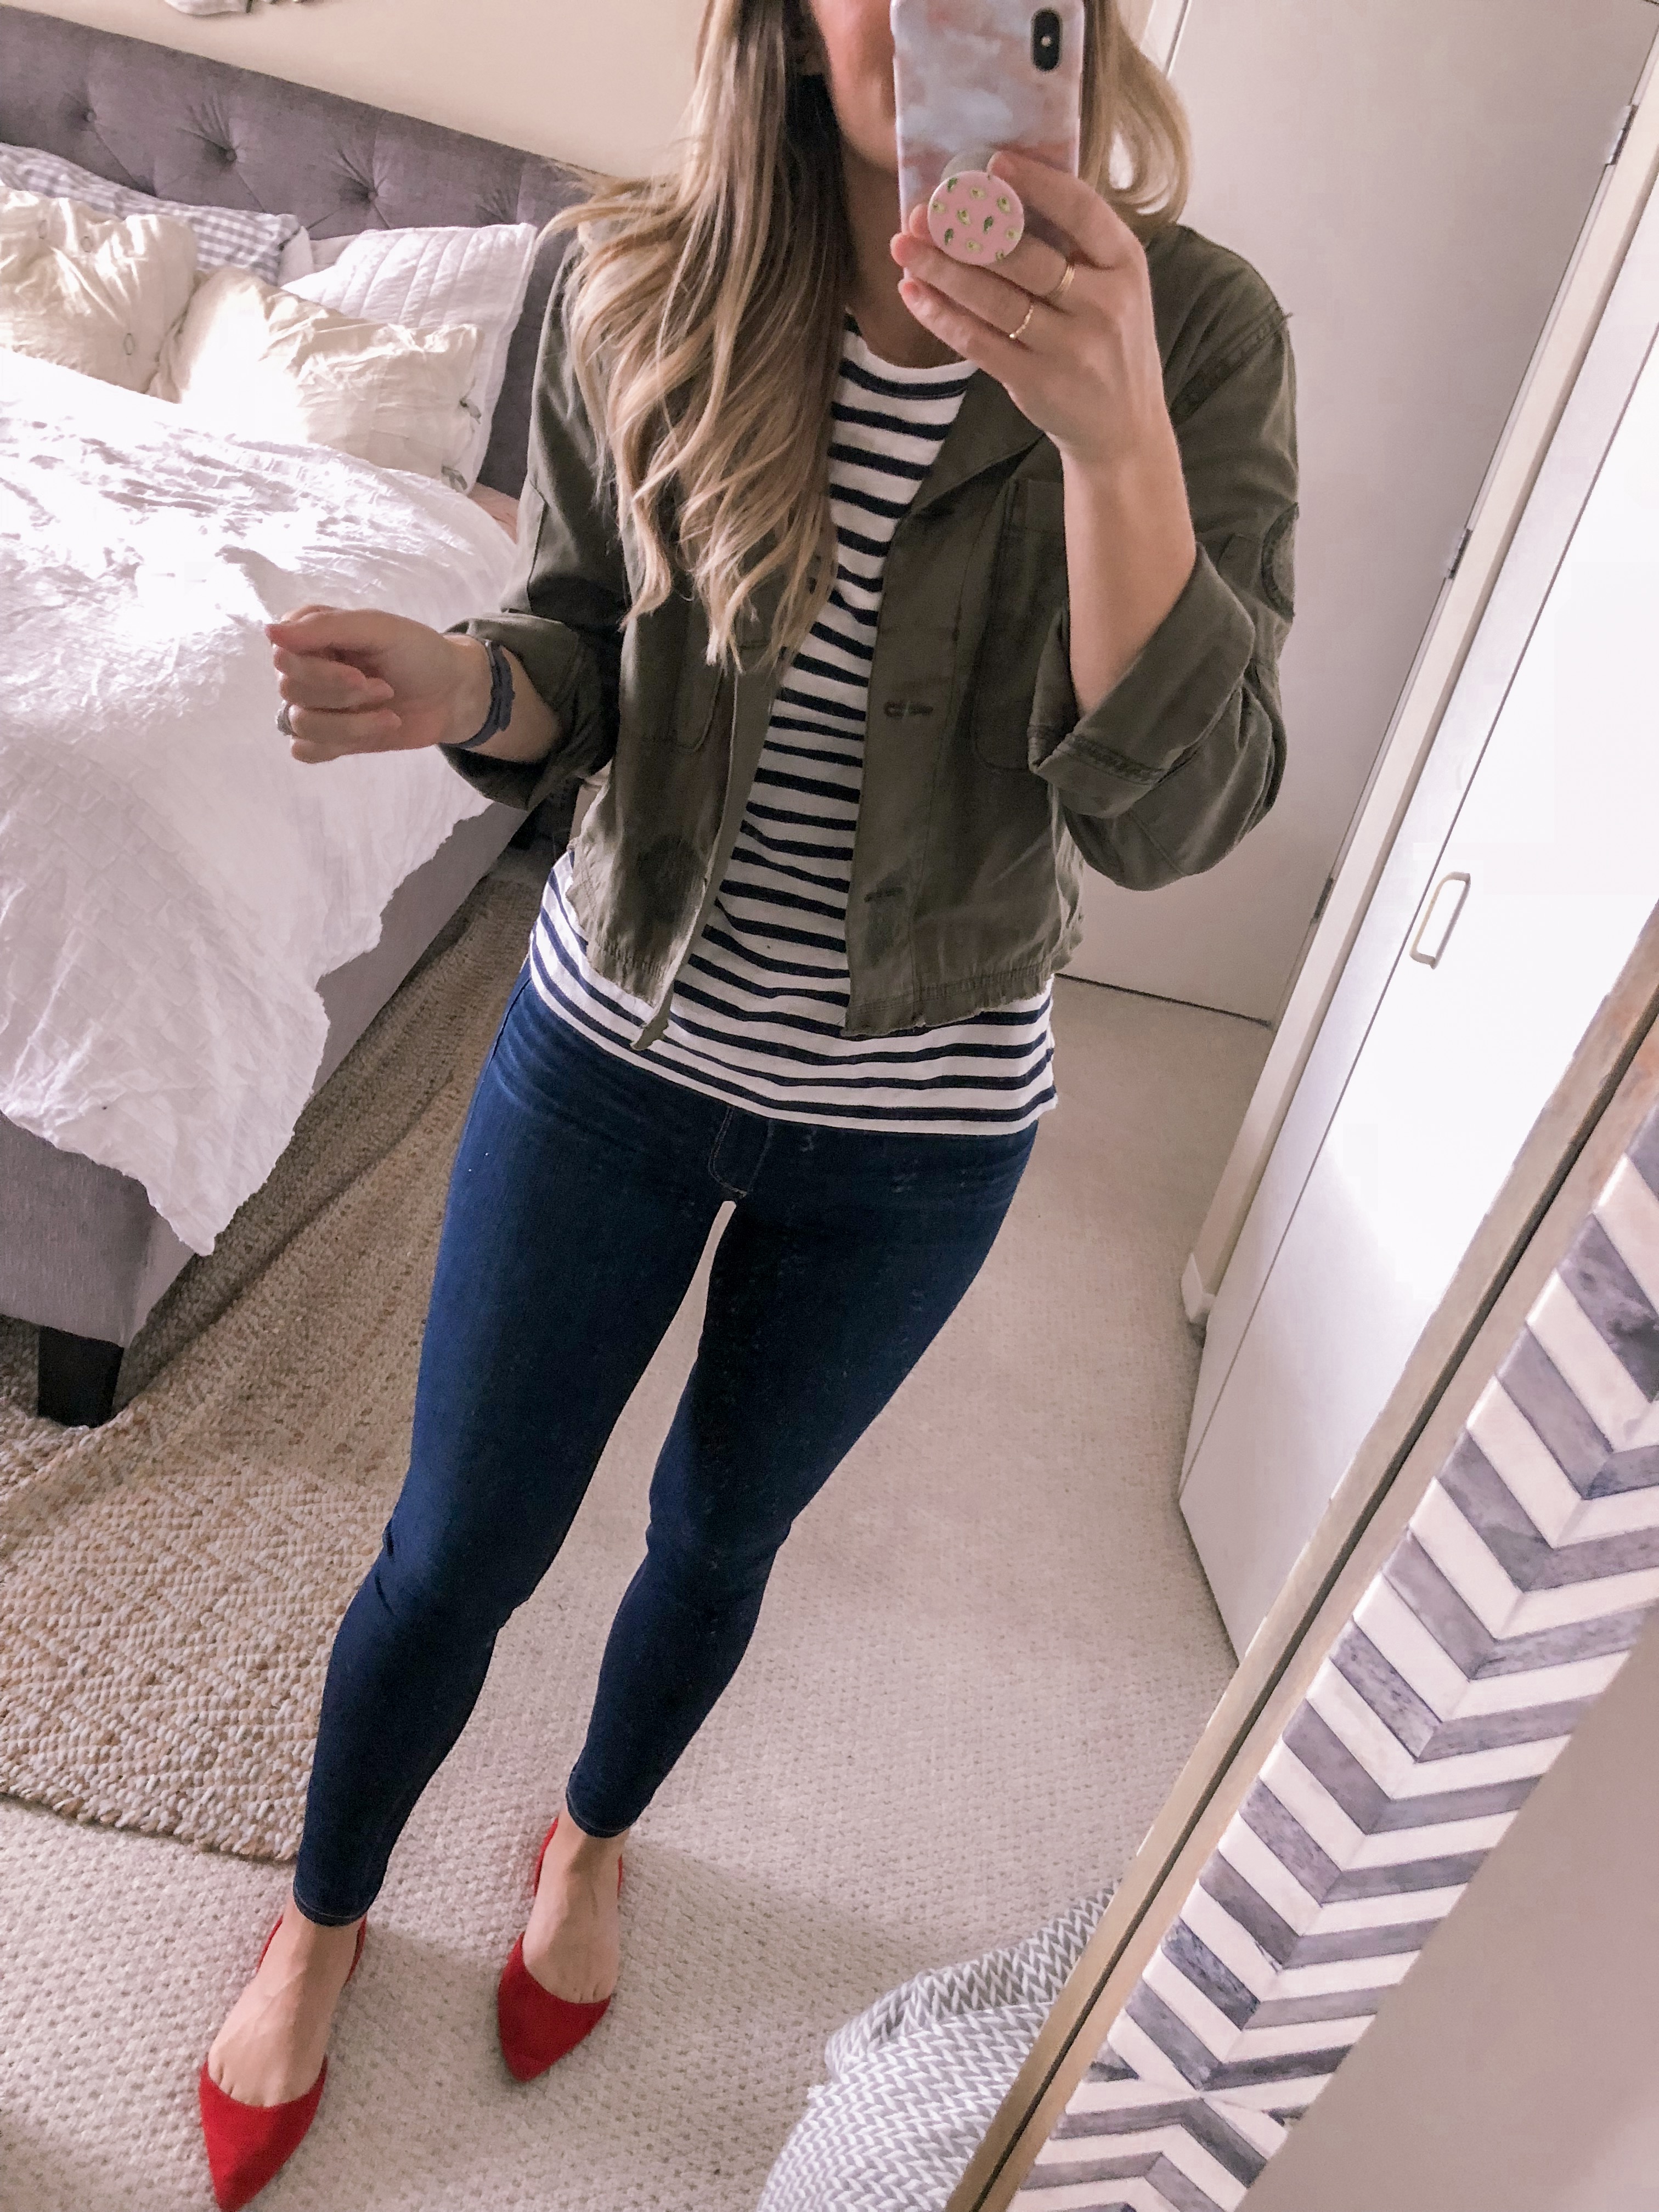 Popular Chicago fashion blogger Visions of Vogue wears a cropped olive green jacket, navy striped top and red suede flats.